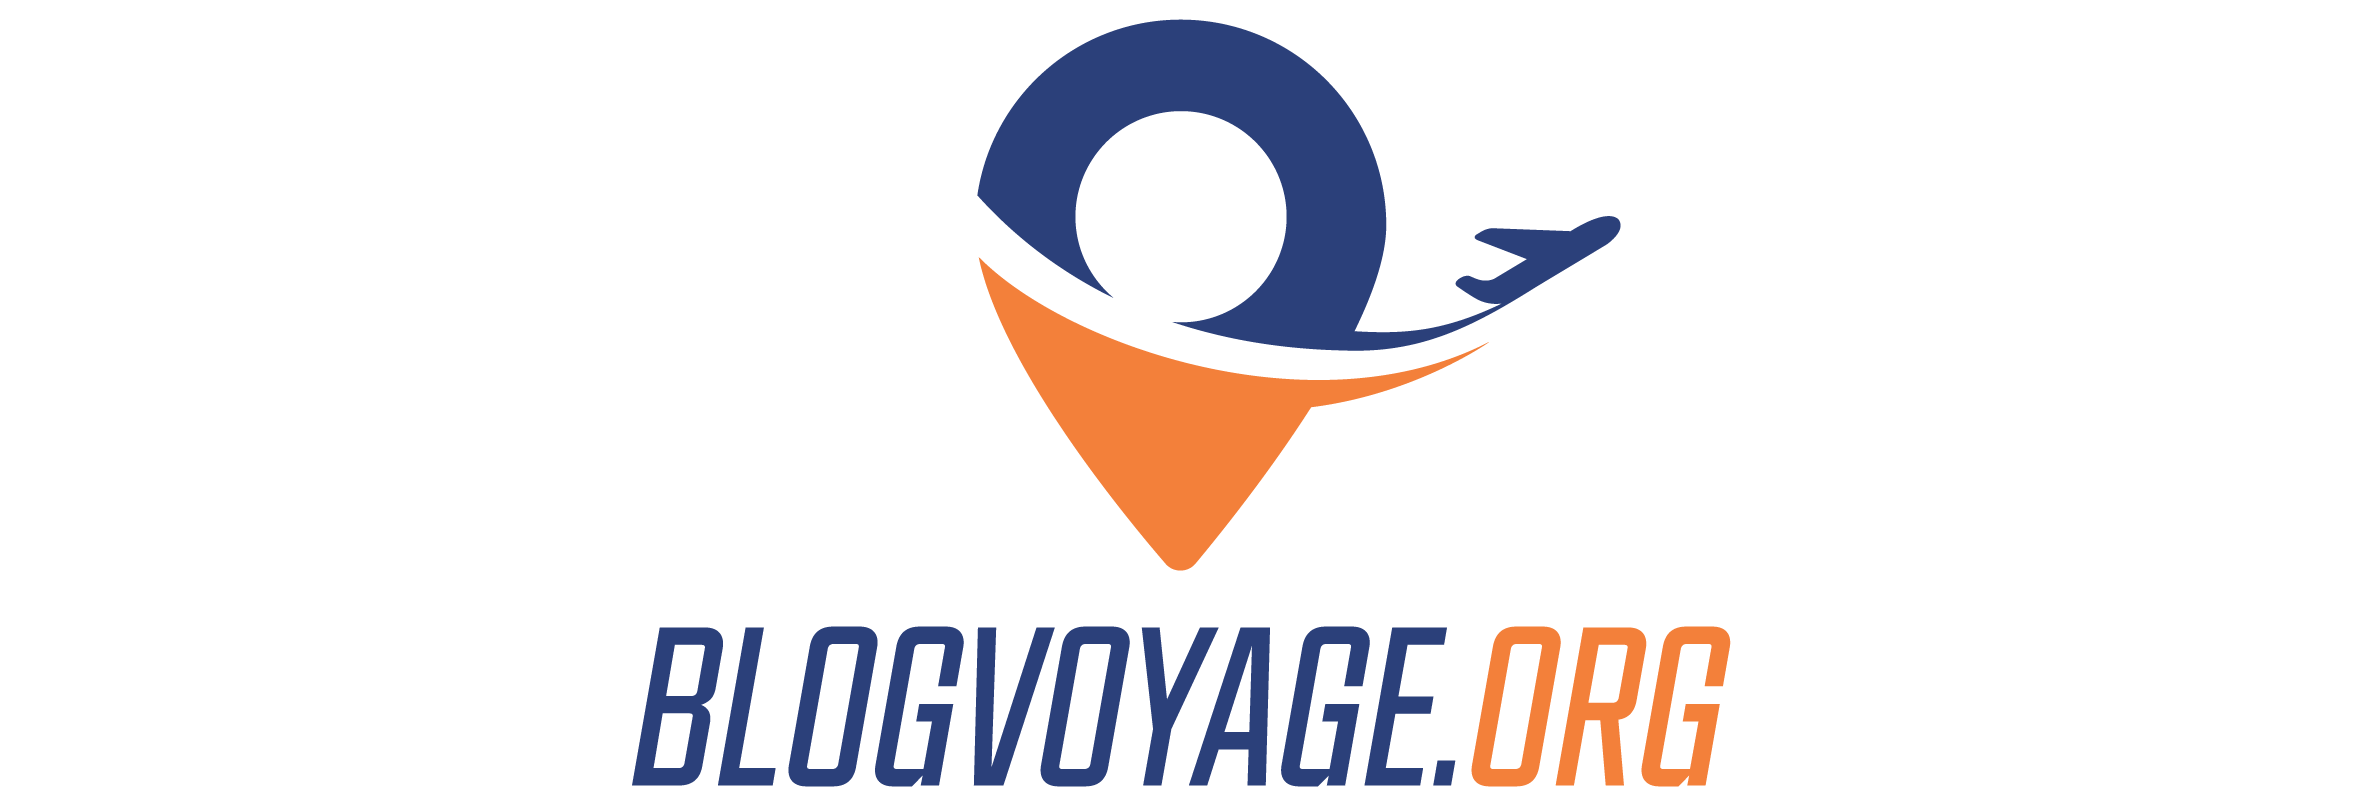 blogvoyage.org